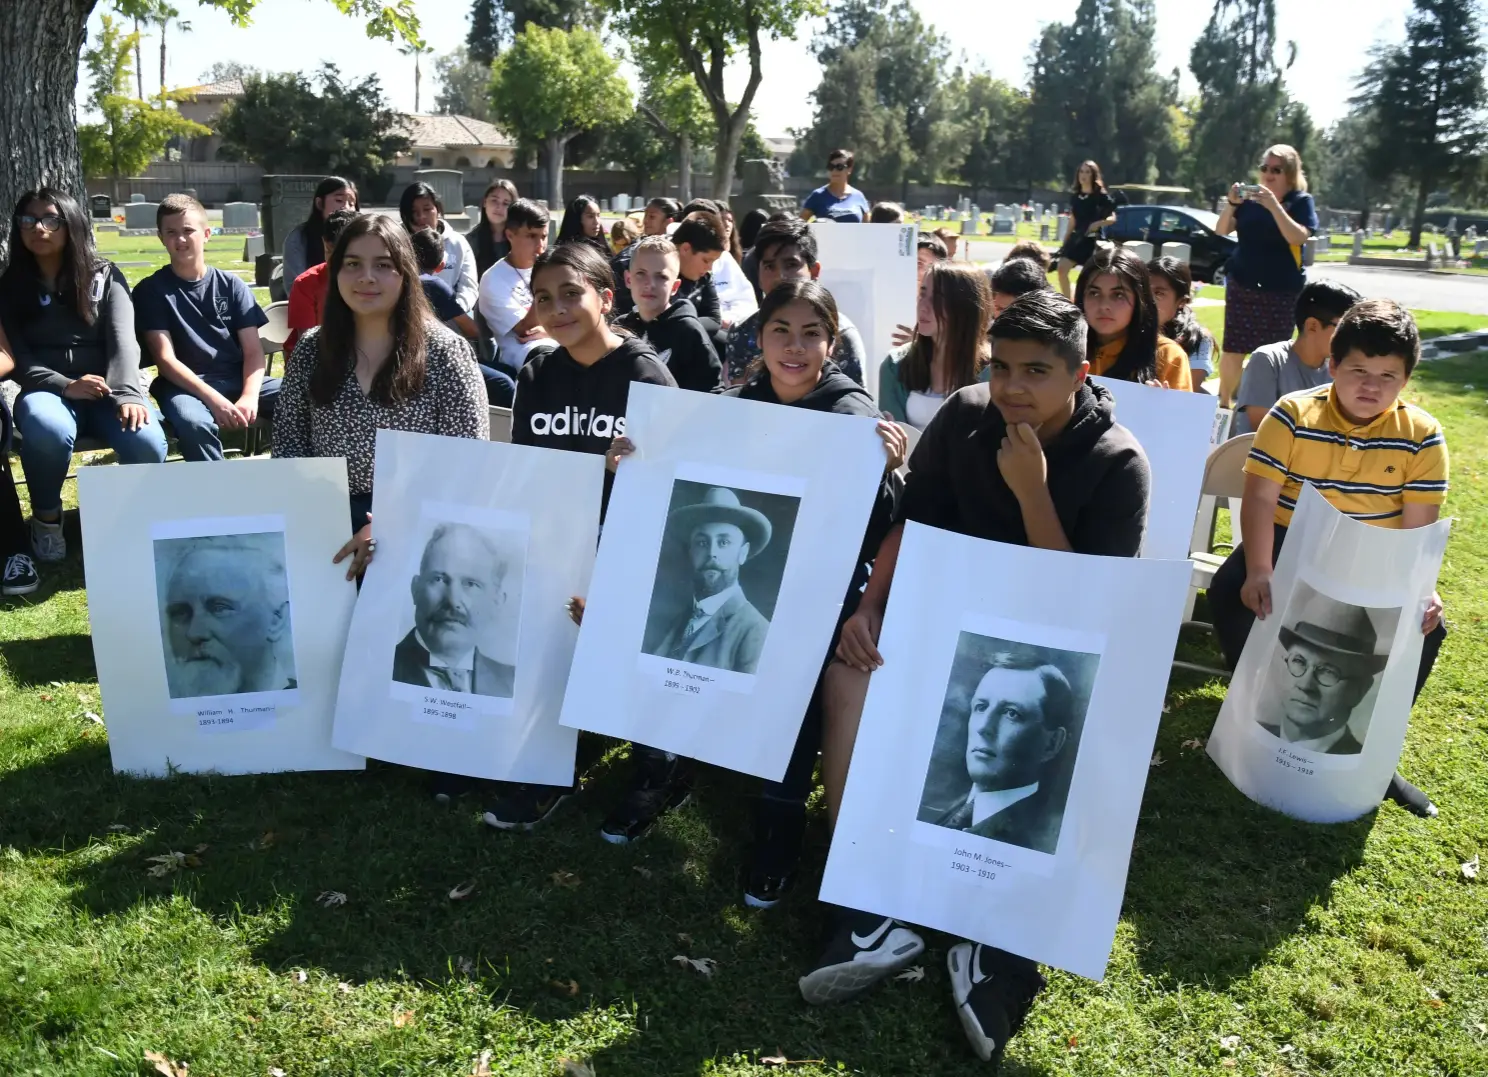 Madera Unified School district students hold posters of past Madera County Sheriffs during a presentation for “Outlaws and Lawmen: Crimes of the Century and the Madera County Sheriffs who Solved Them.”